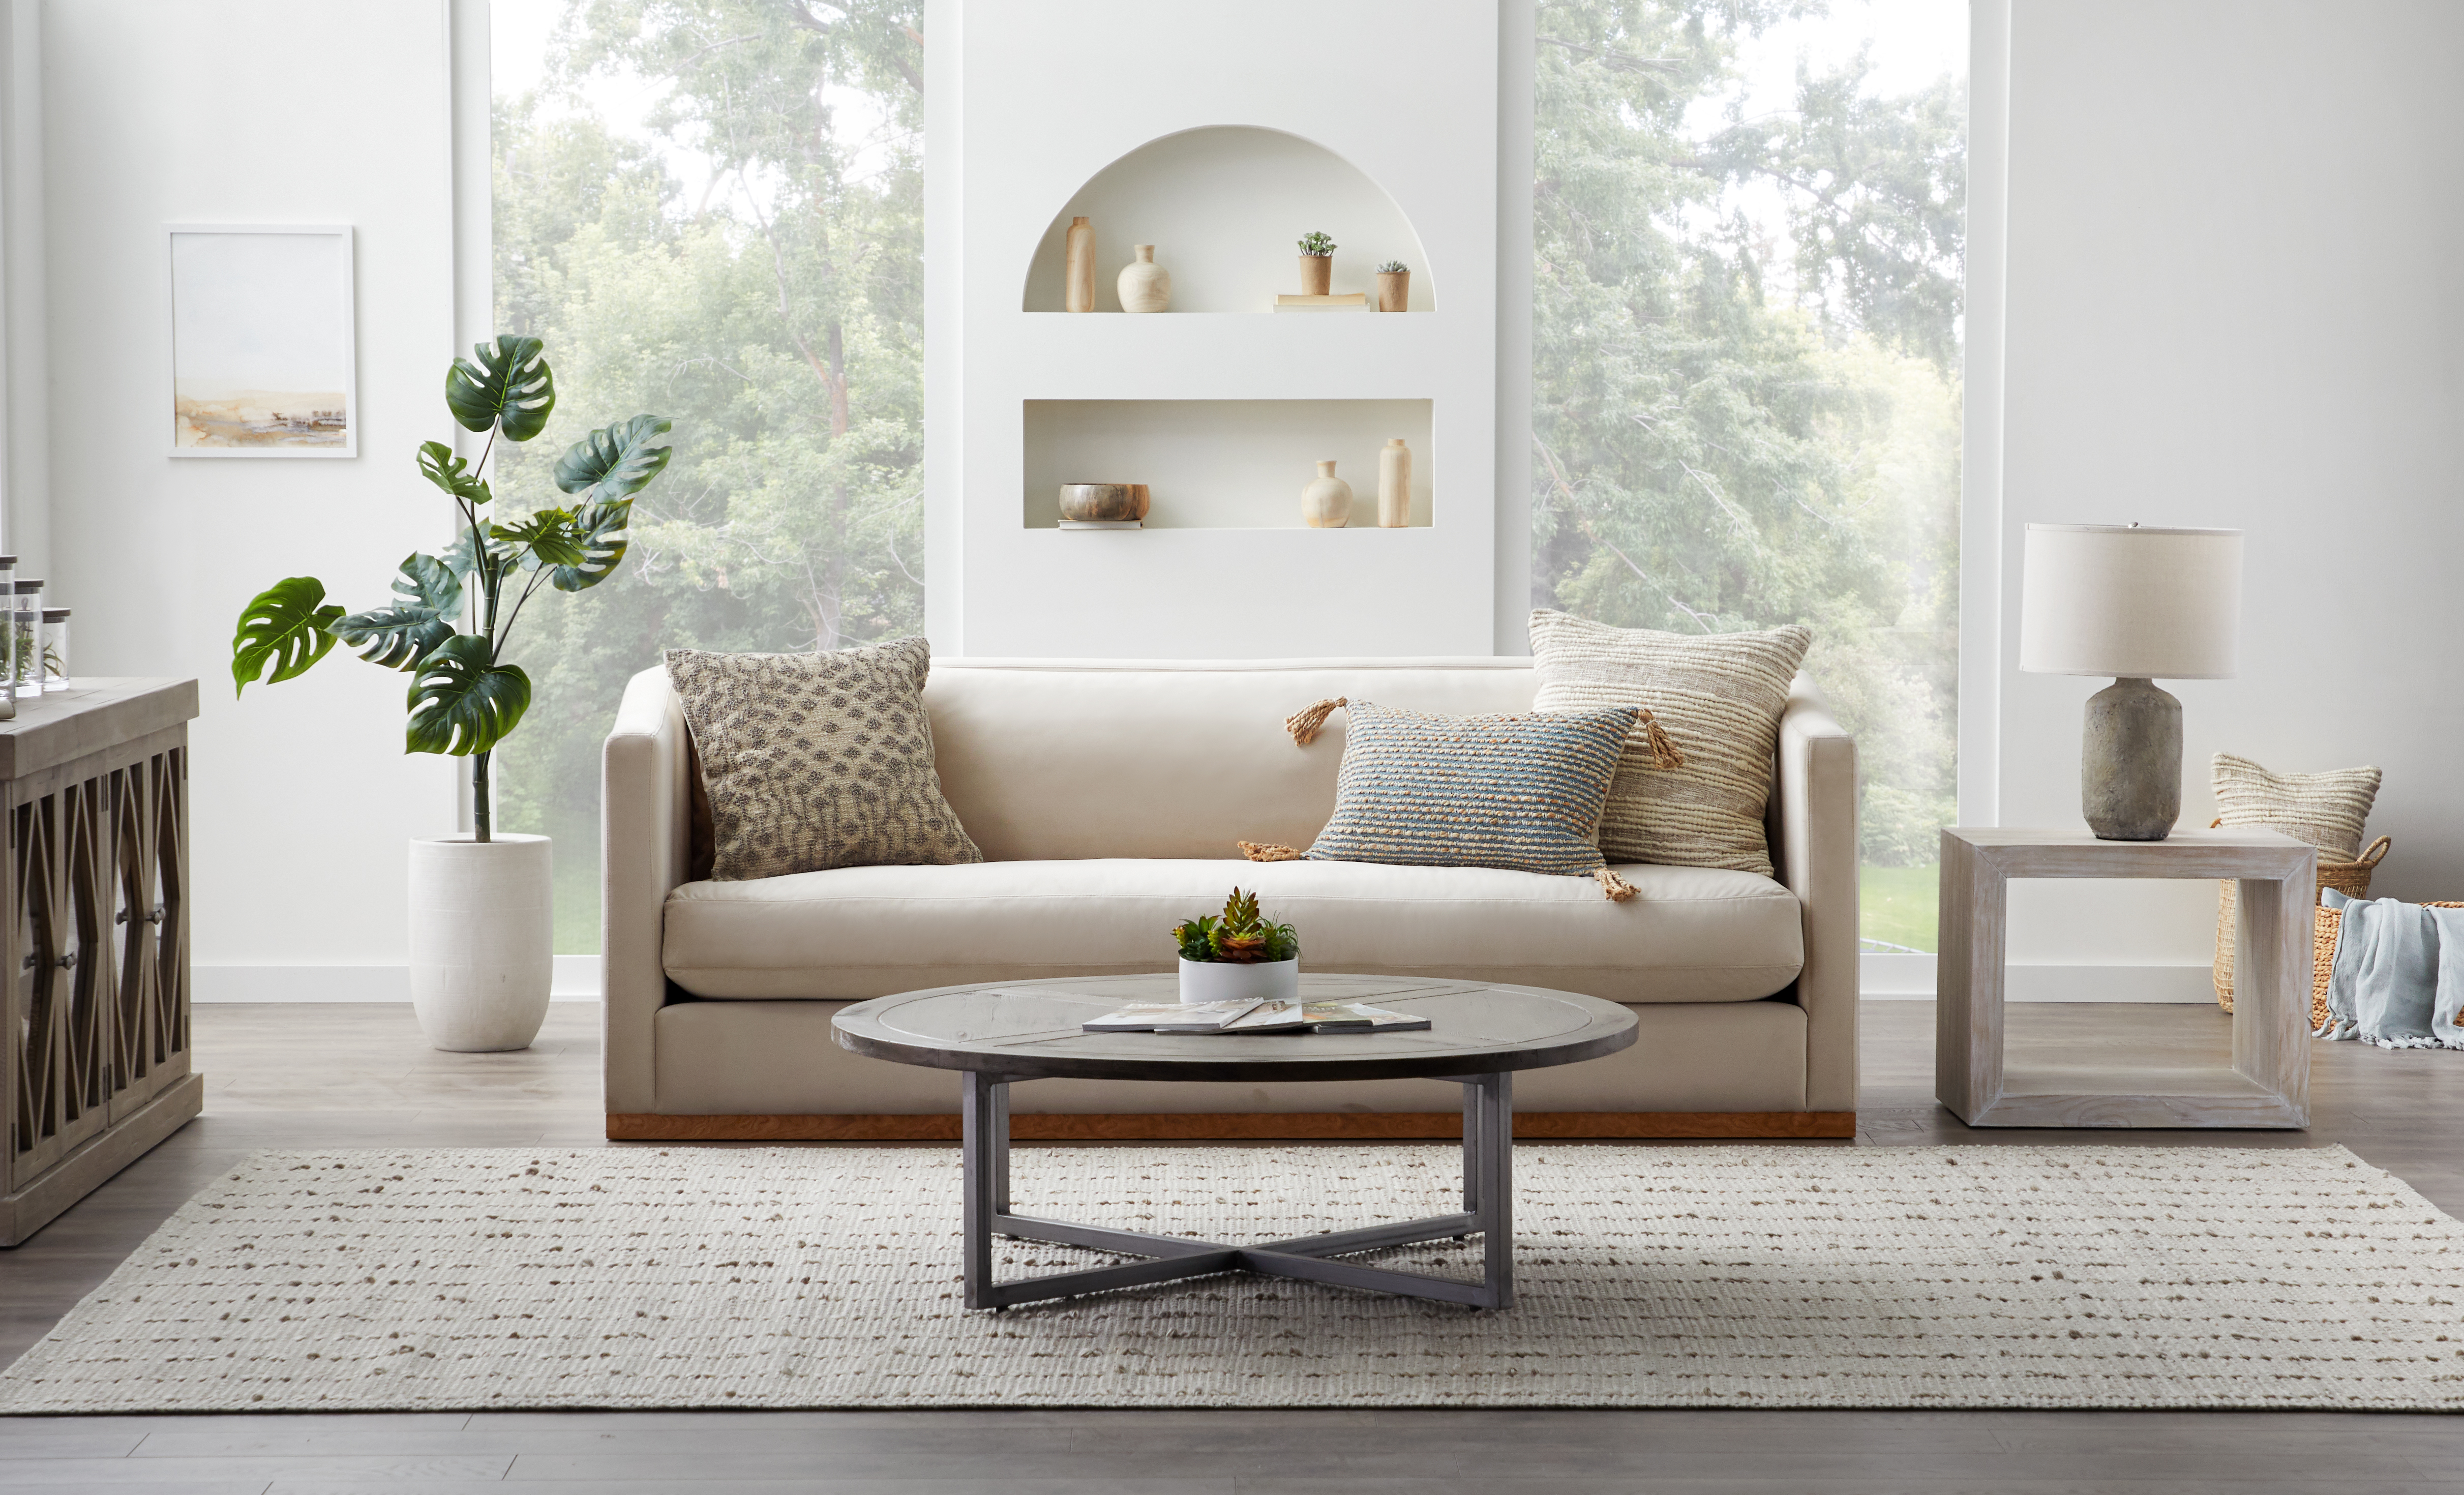 Find the Perfect Sofa or Couch For Your Living Room